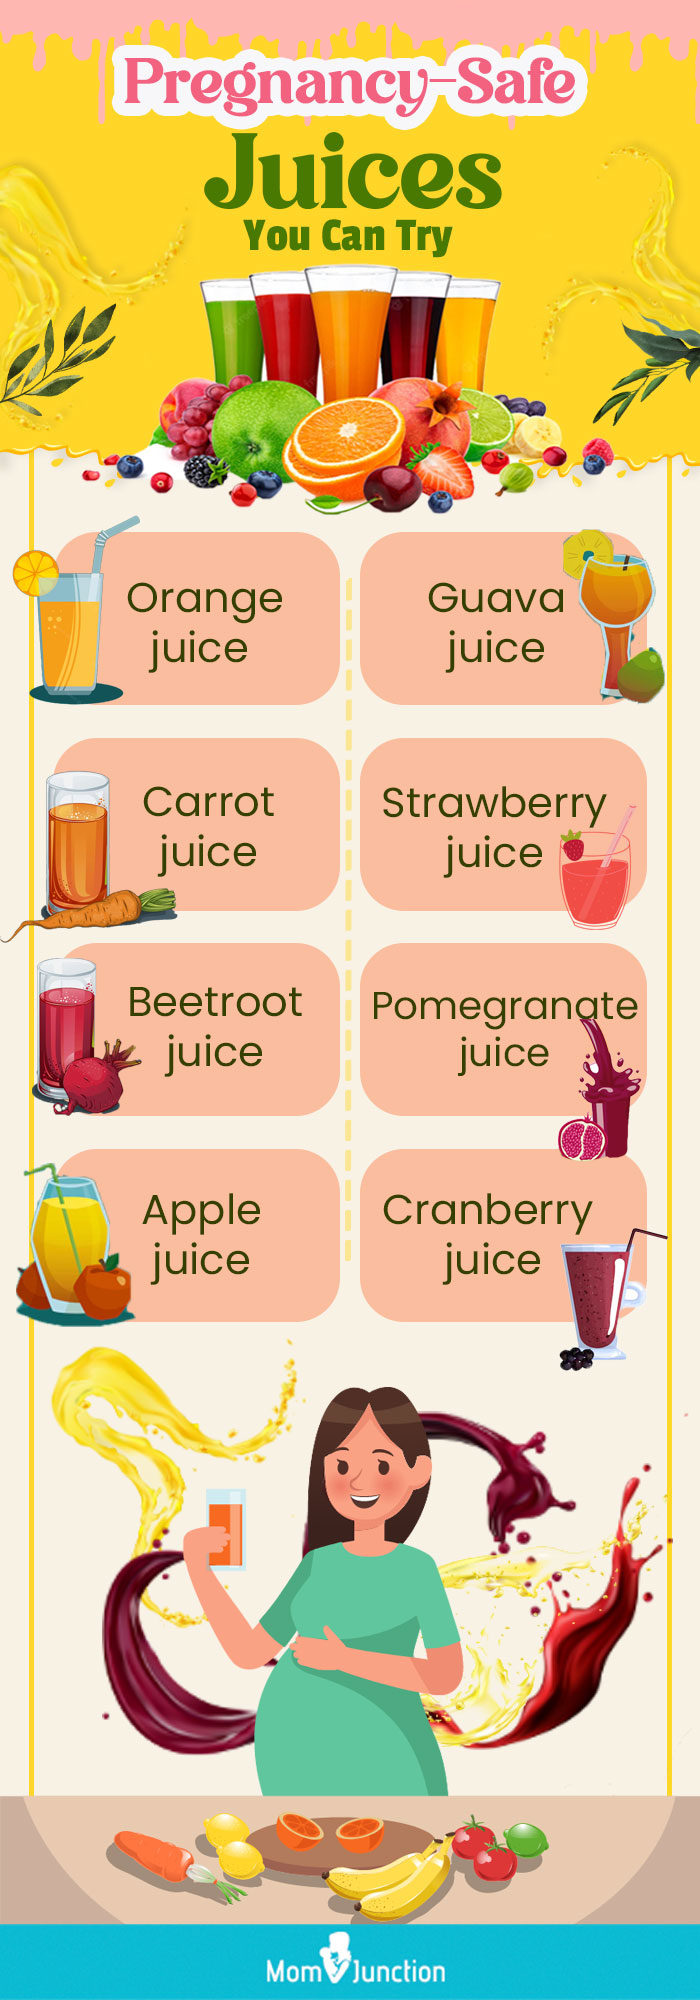 pregnancy safe juices you can try (infographic)